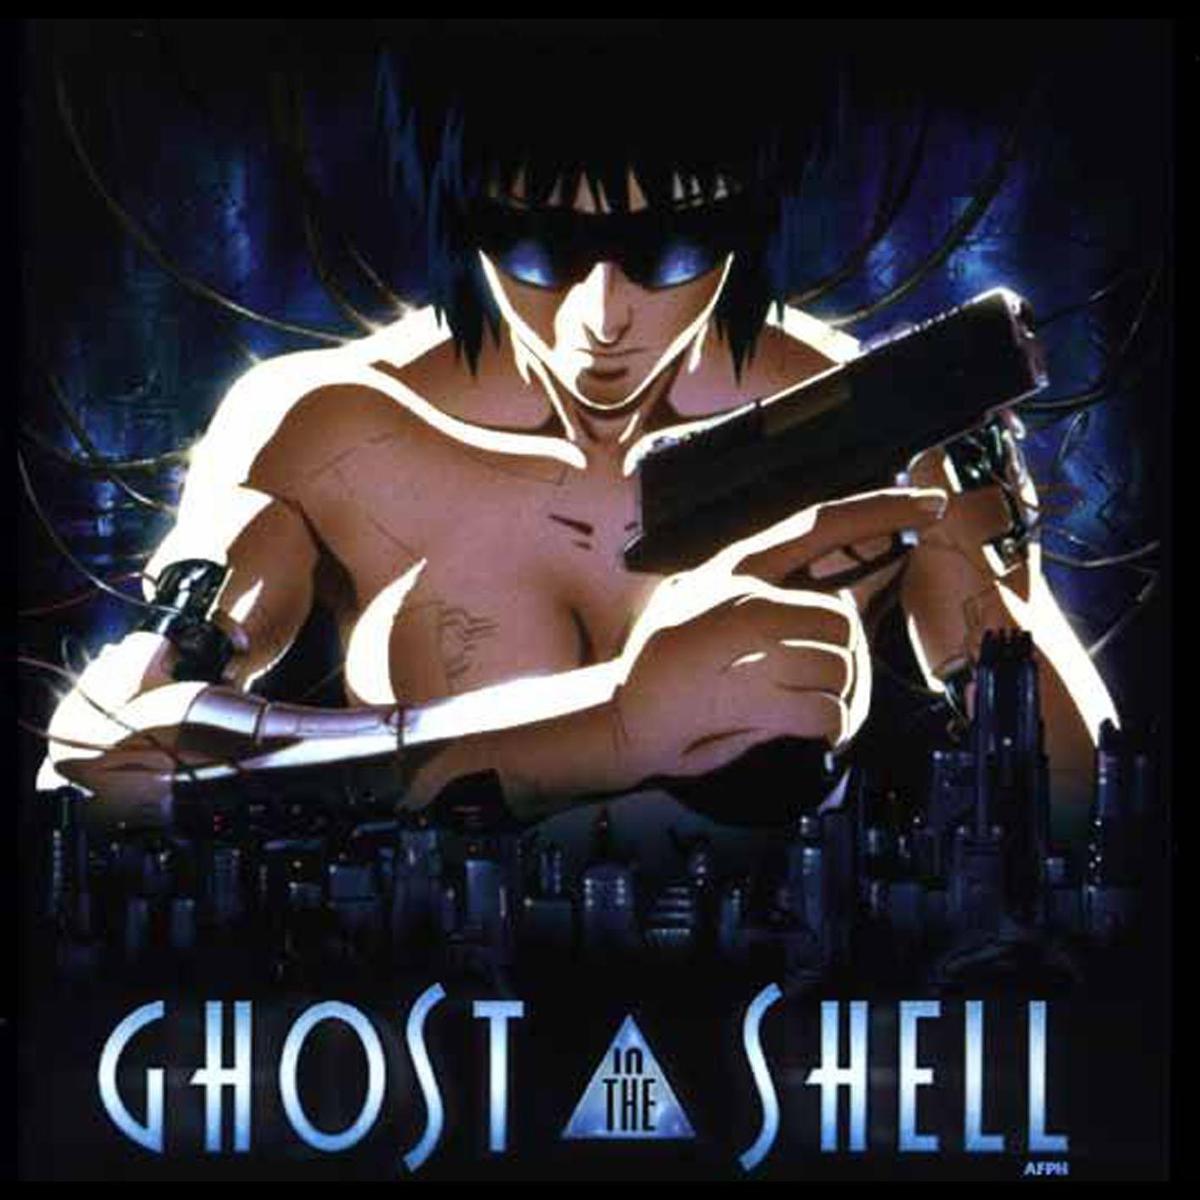 /dateien/uh54979,1270211464,ghost in the shell